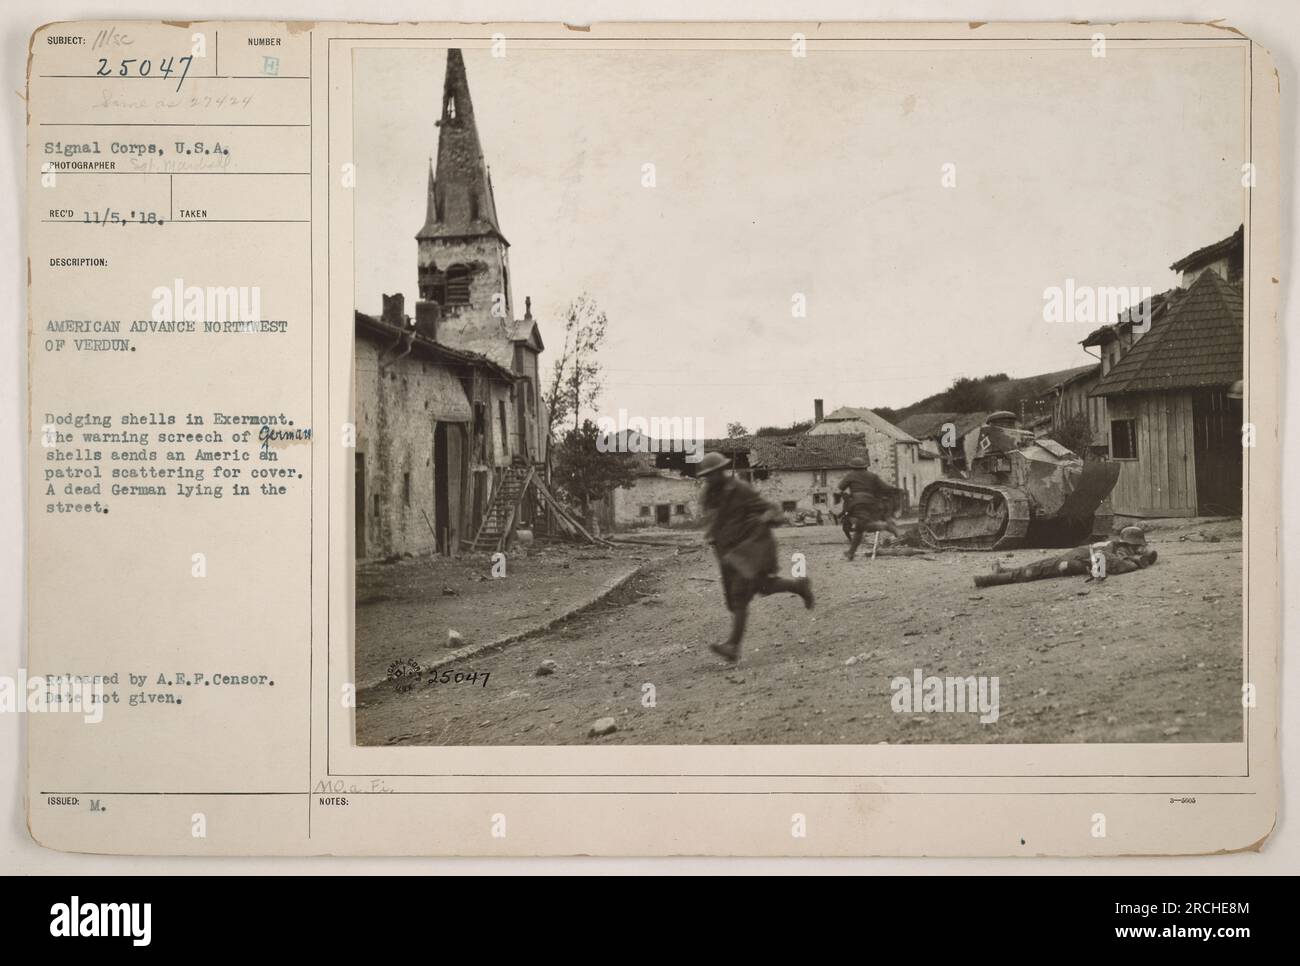 American patrol taking cover from shellfire in Exermont during the U.S. advance northwest of Verdun during World War One. A dead German soldier can be seen lying in the street. This photograph was released by the A.E.P. Censor, but the specific date of the image is unknown. Stock Photo